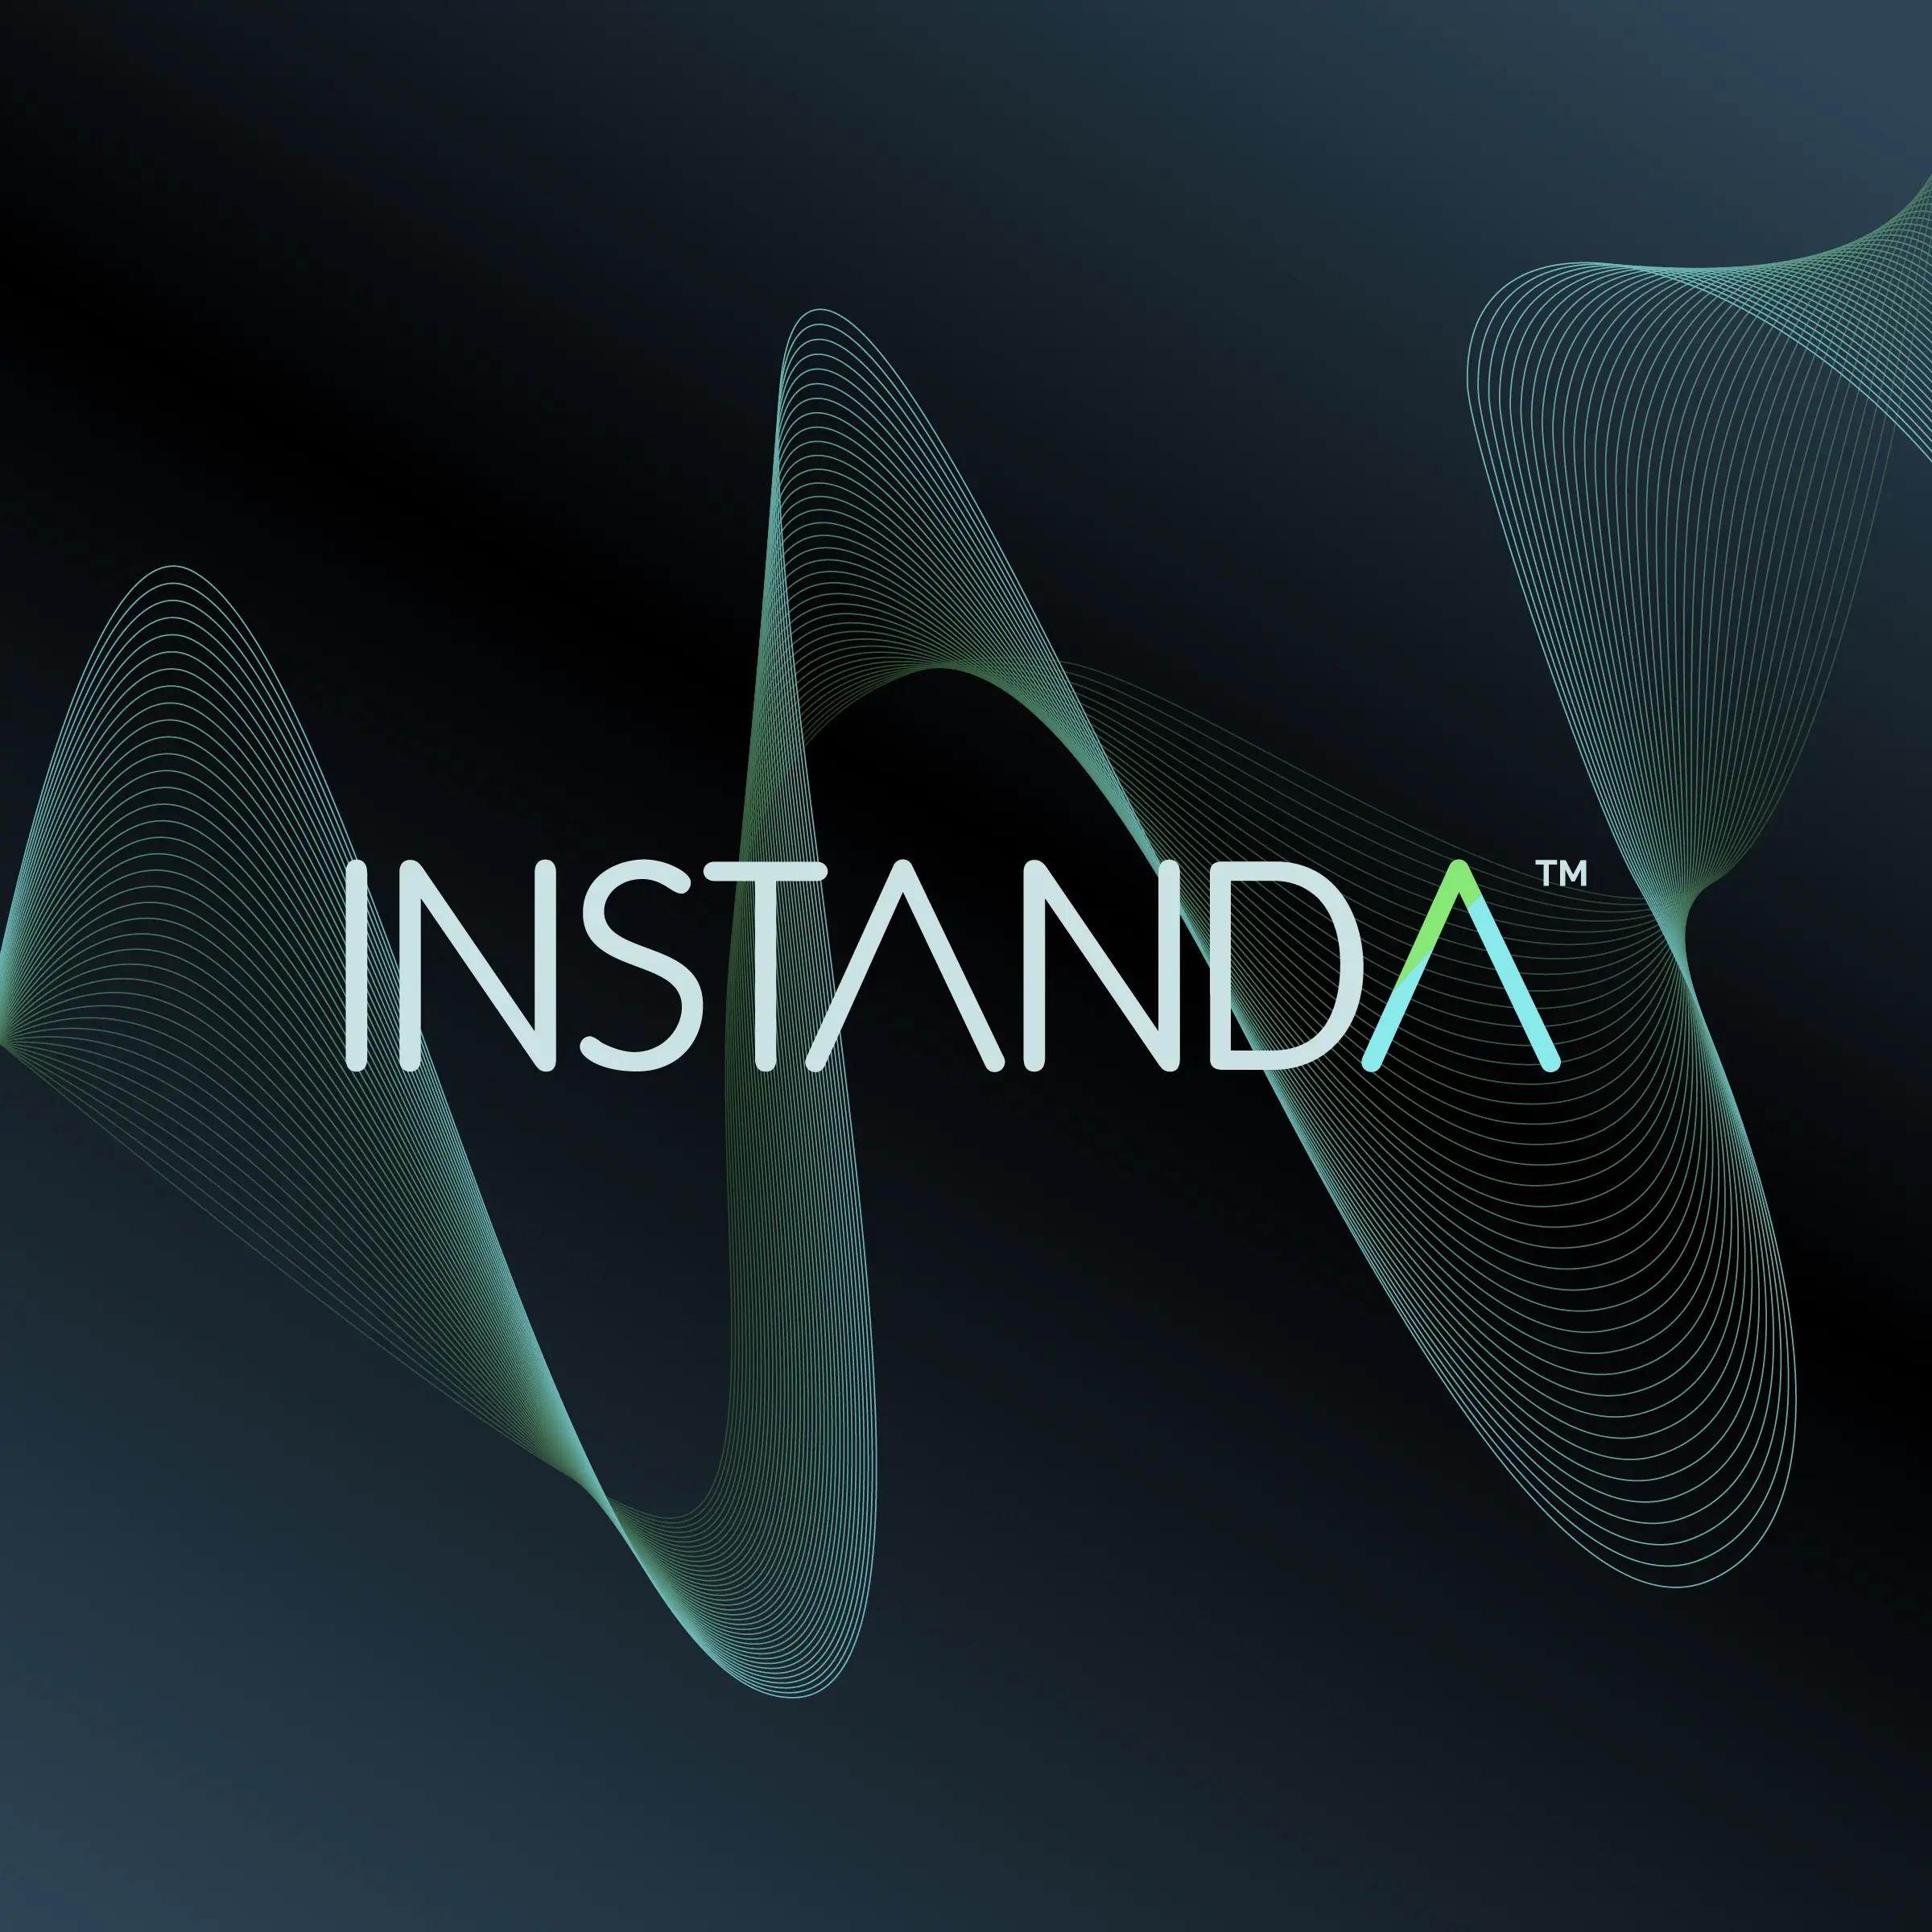 Instanda - Brand naming and Brand identity design by Peek Creative Limited